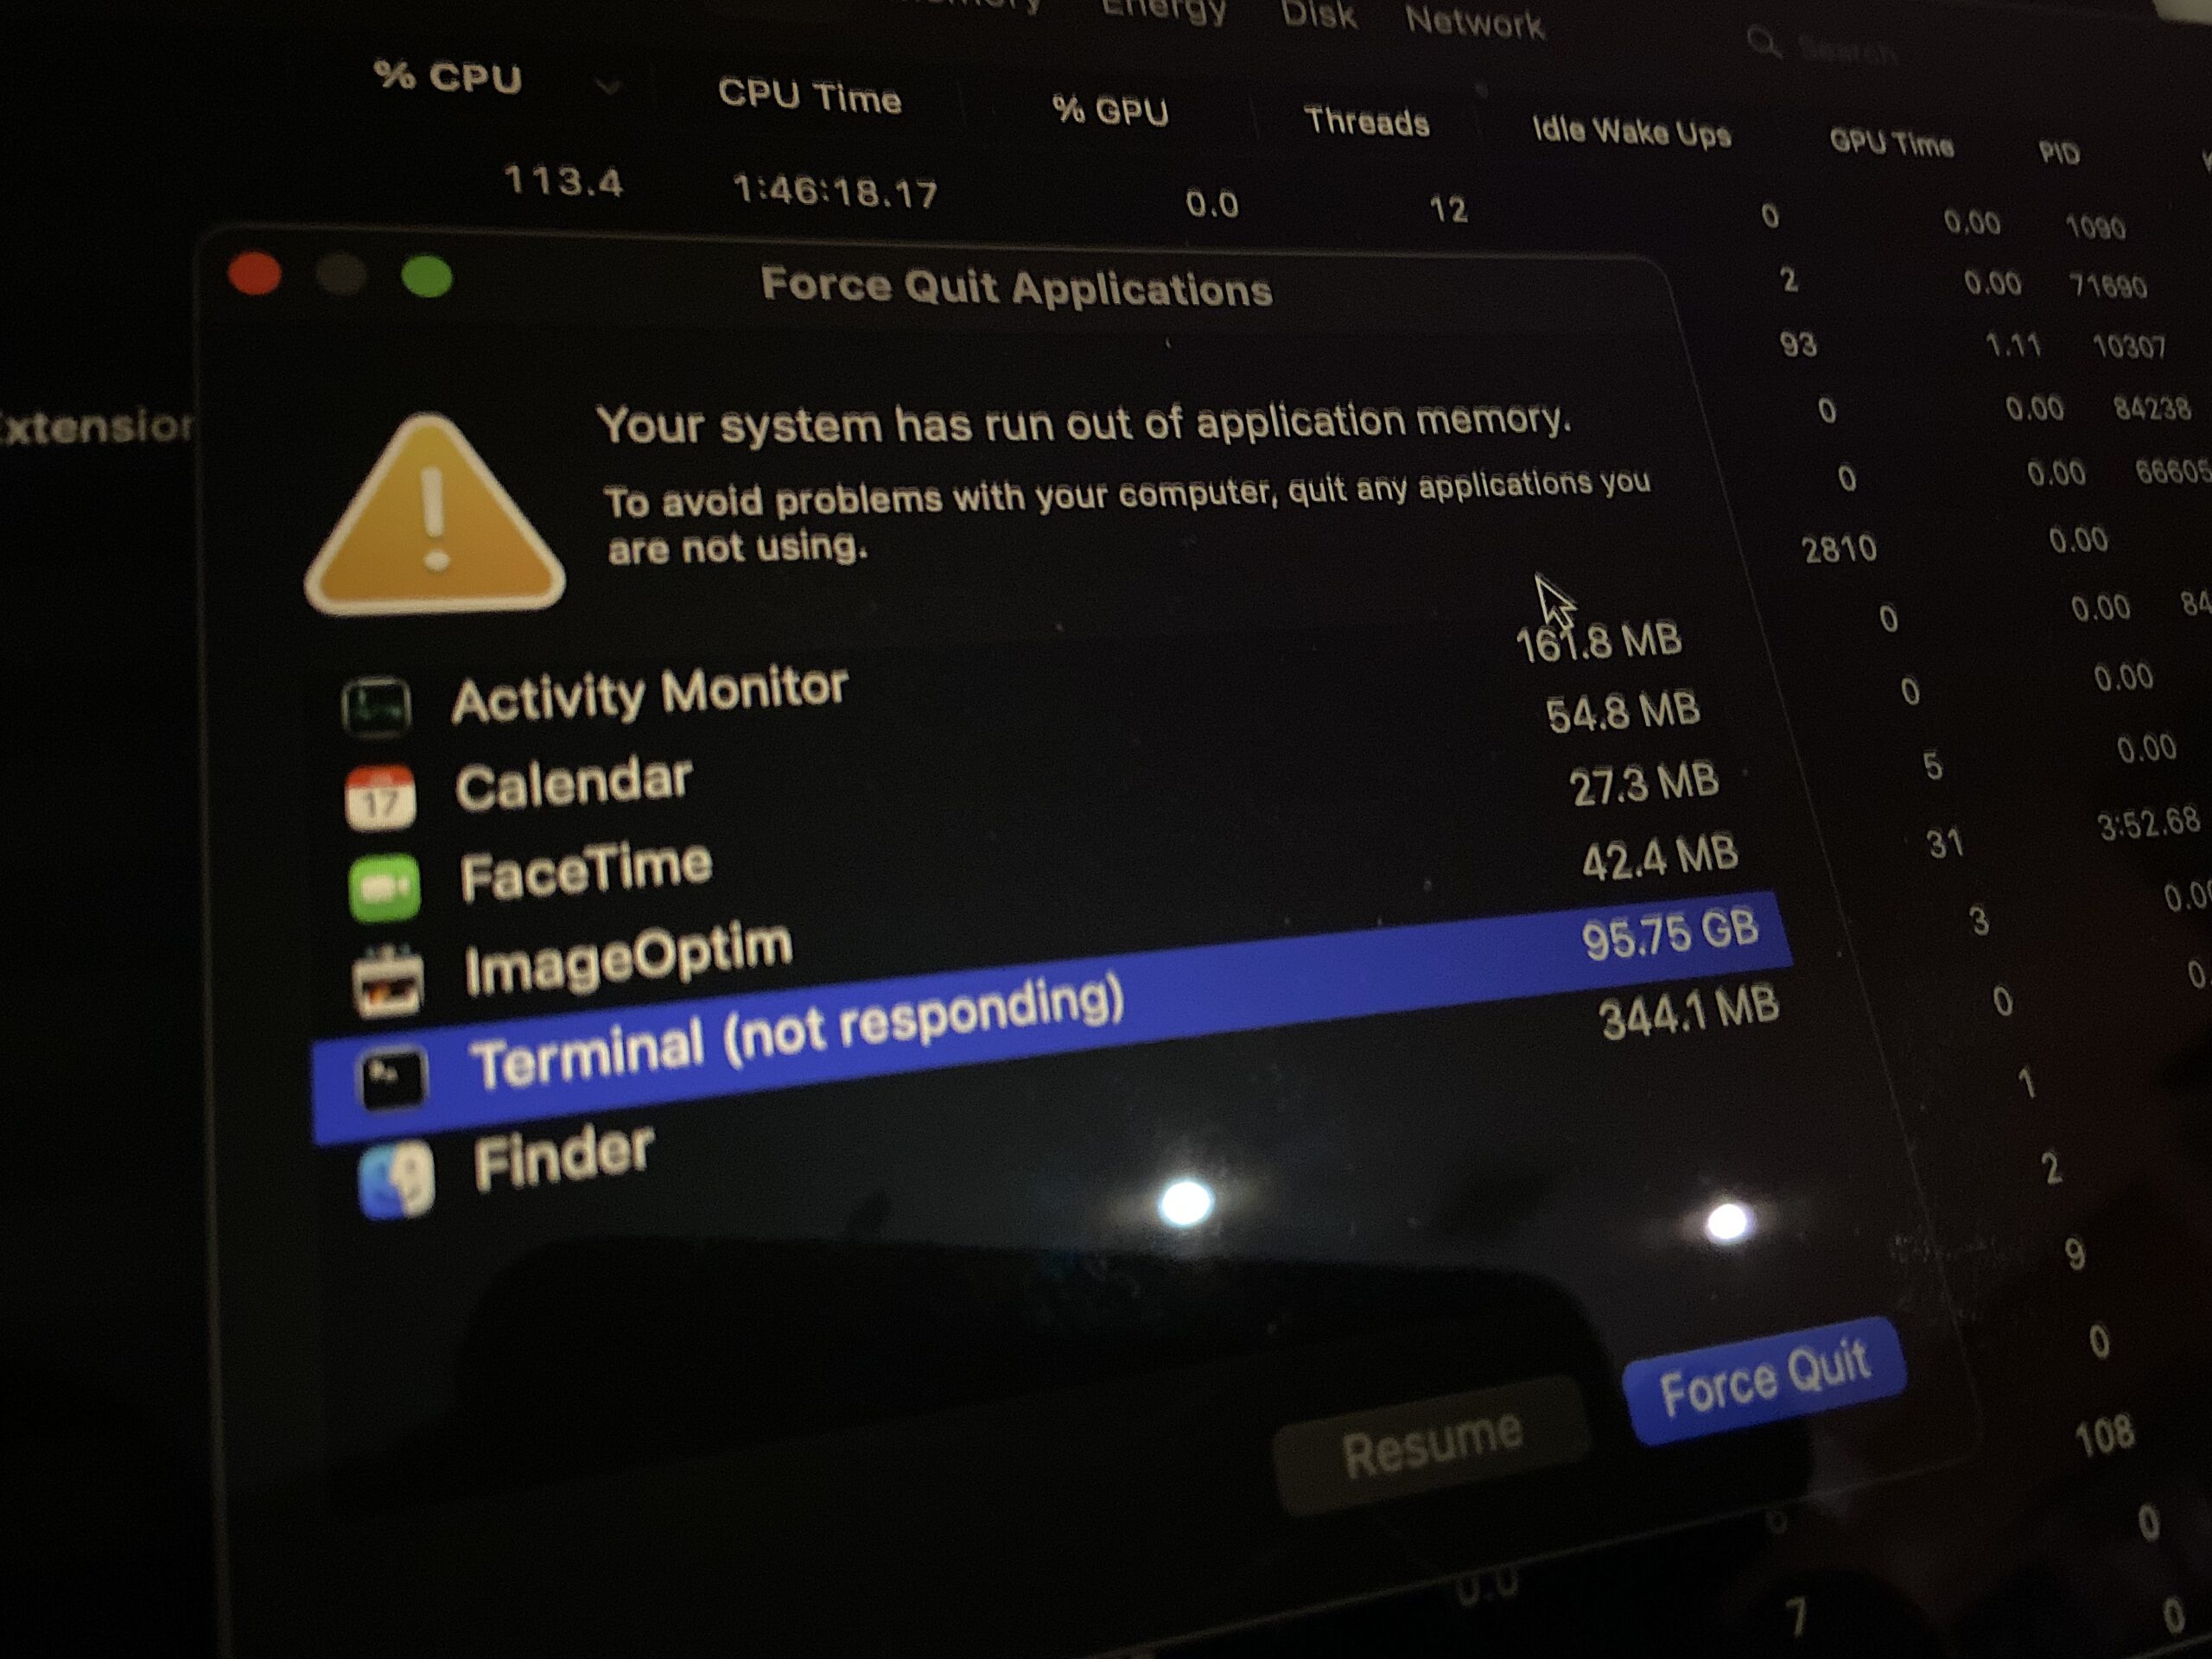 How to Fix “Your system has run out of application memory” on Mac